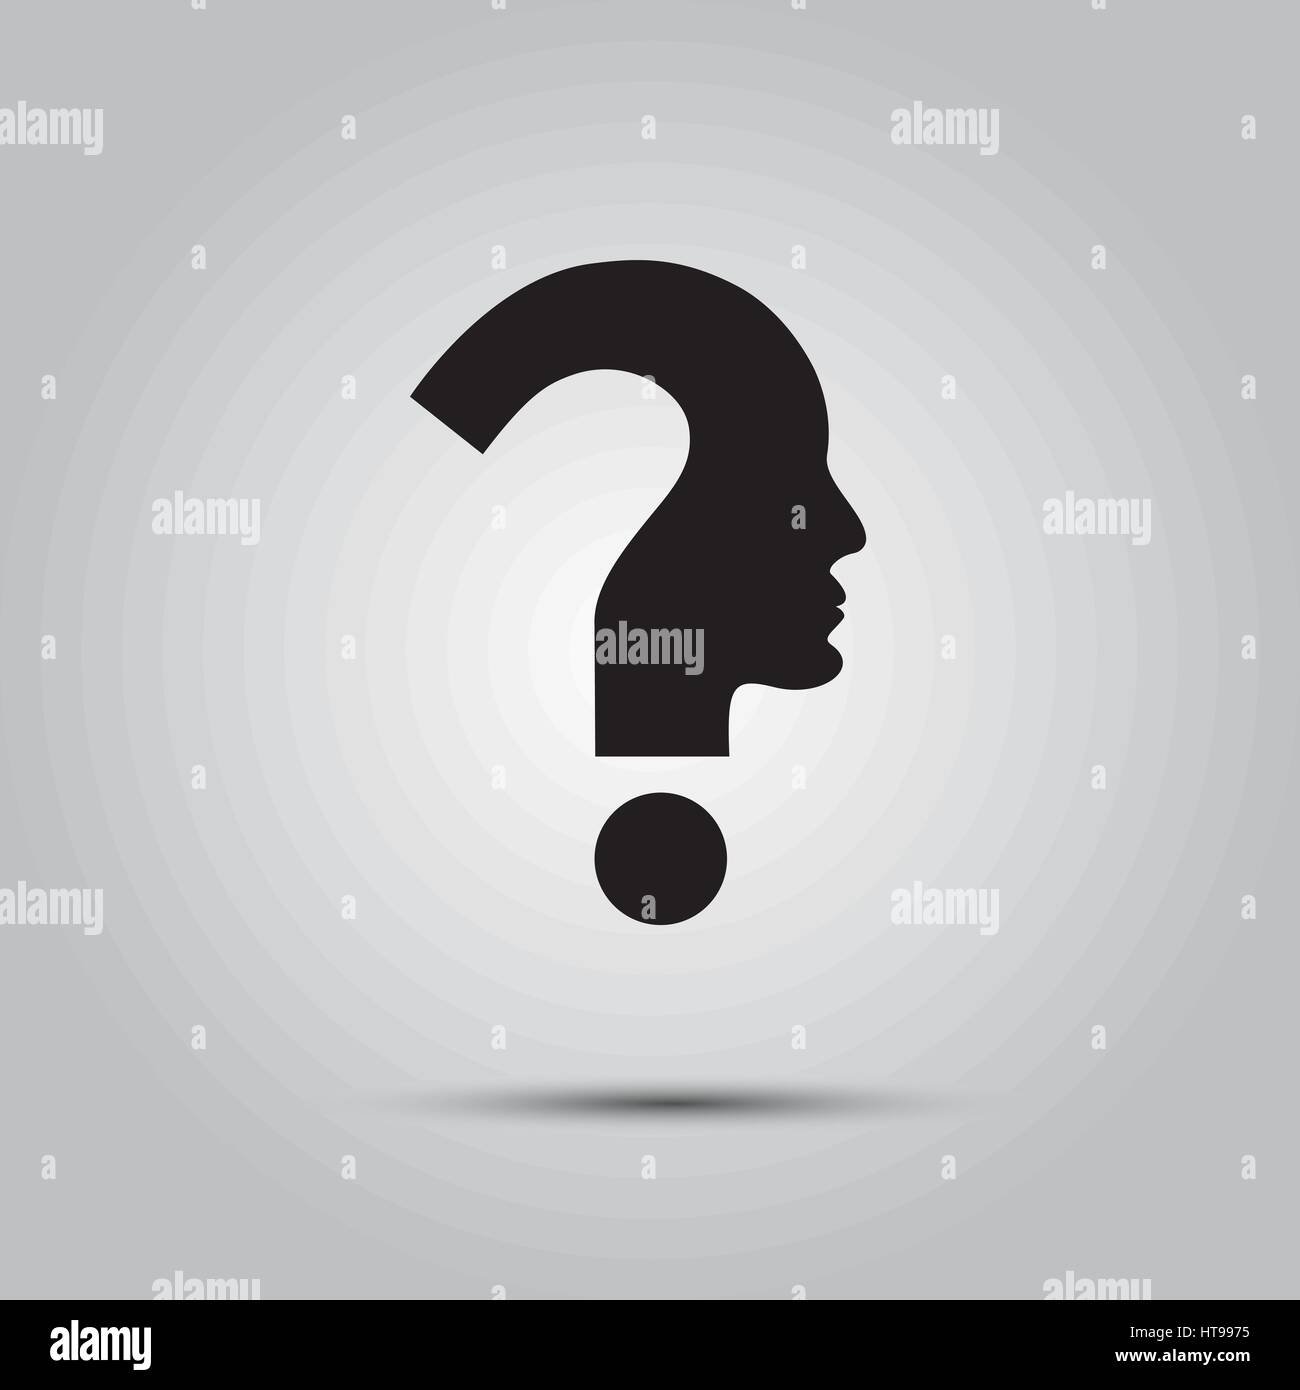 Human face with question mark. Illustration on white Stock Vector